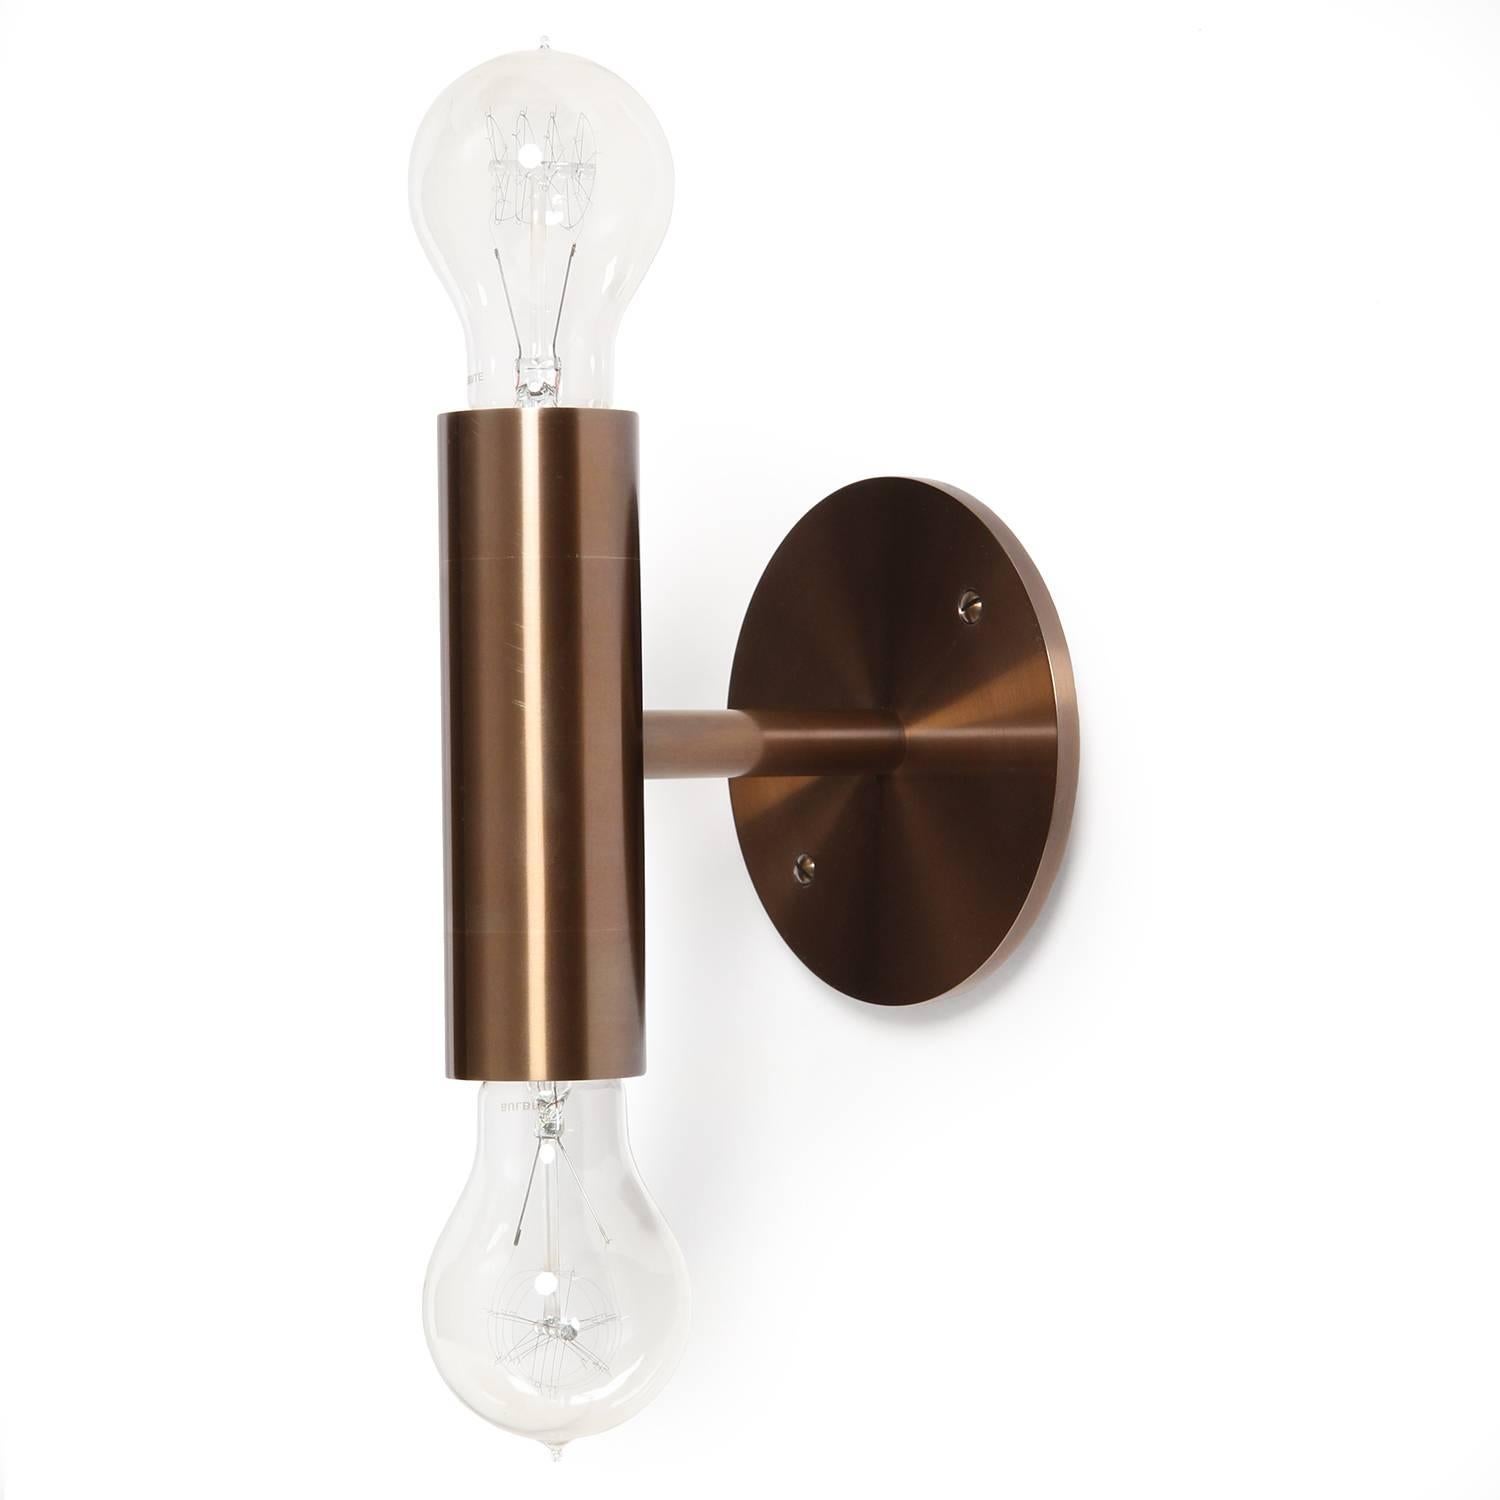 A spare and impeccably rendered wall / sconce double light fixture made of solid brass. The fixture can be oriented vertically or horizontally. Available in polished, brushed, patinated or blackened finishes. Lead time 4-8 weeks. Made at the Wyeth